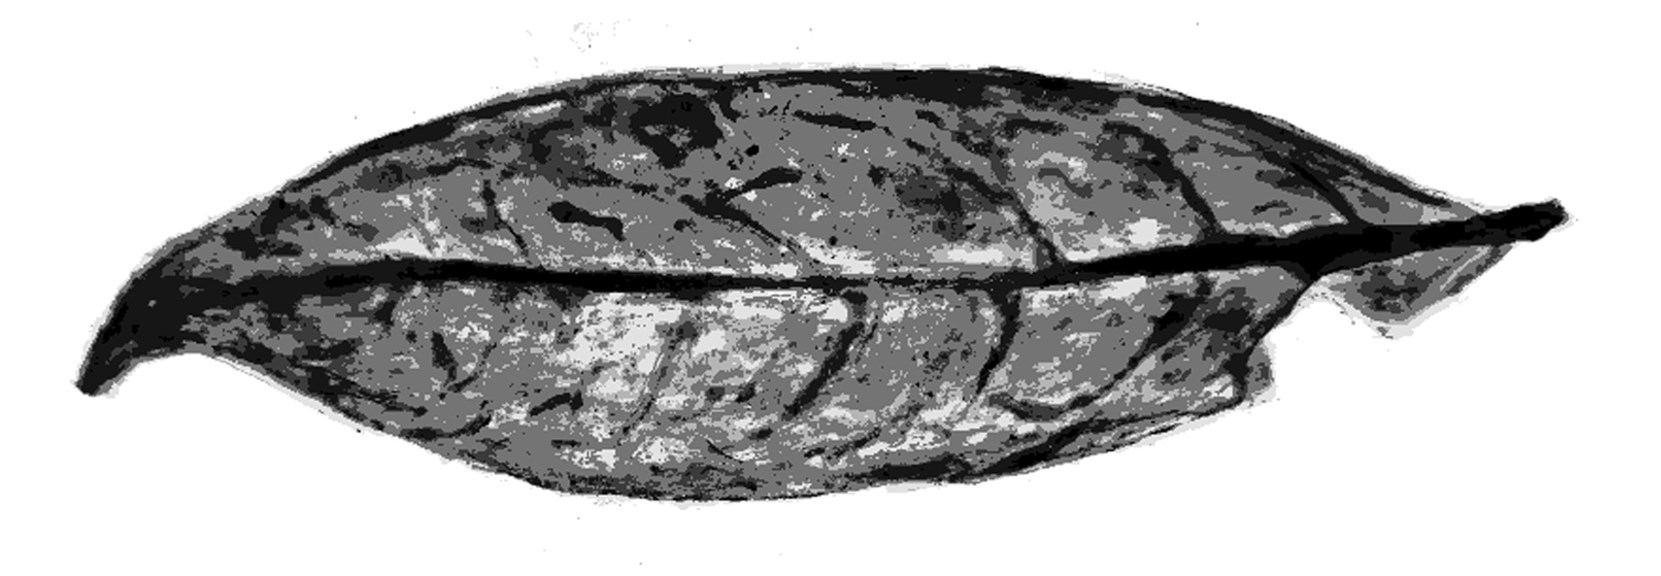 Fossilised leaf with rounded edges and point spike at the end. 